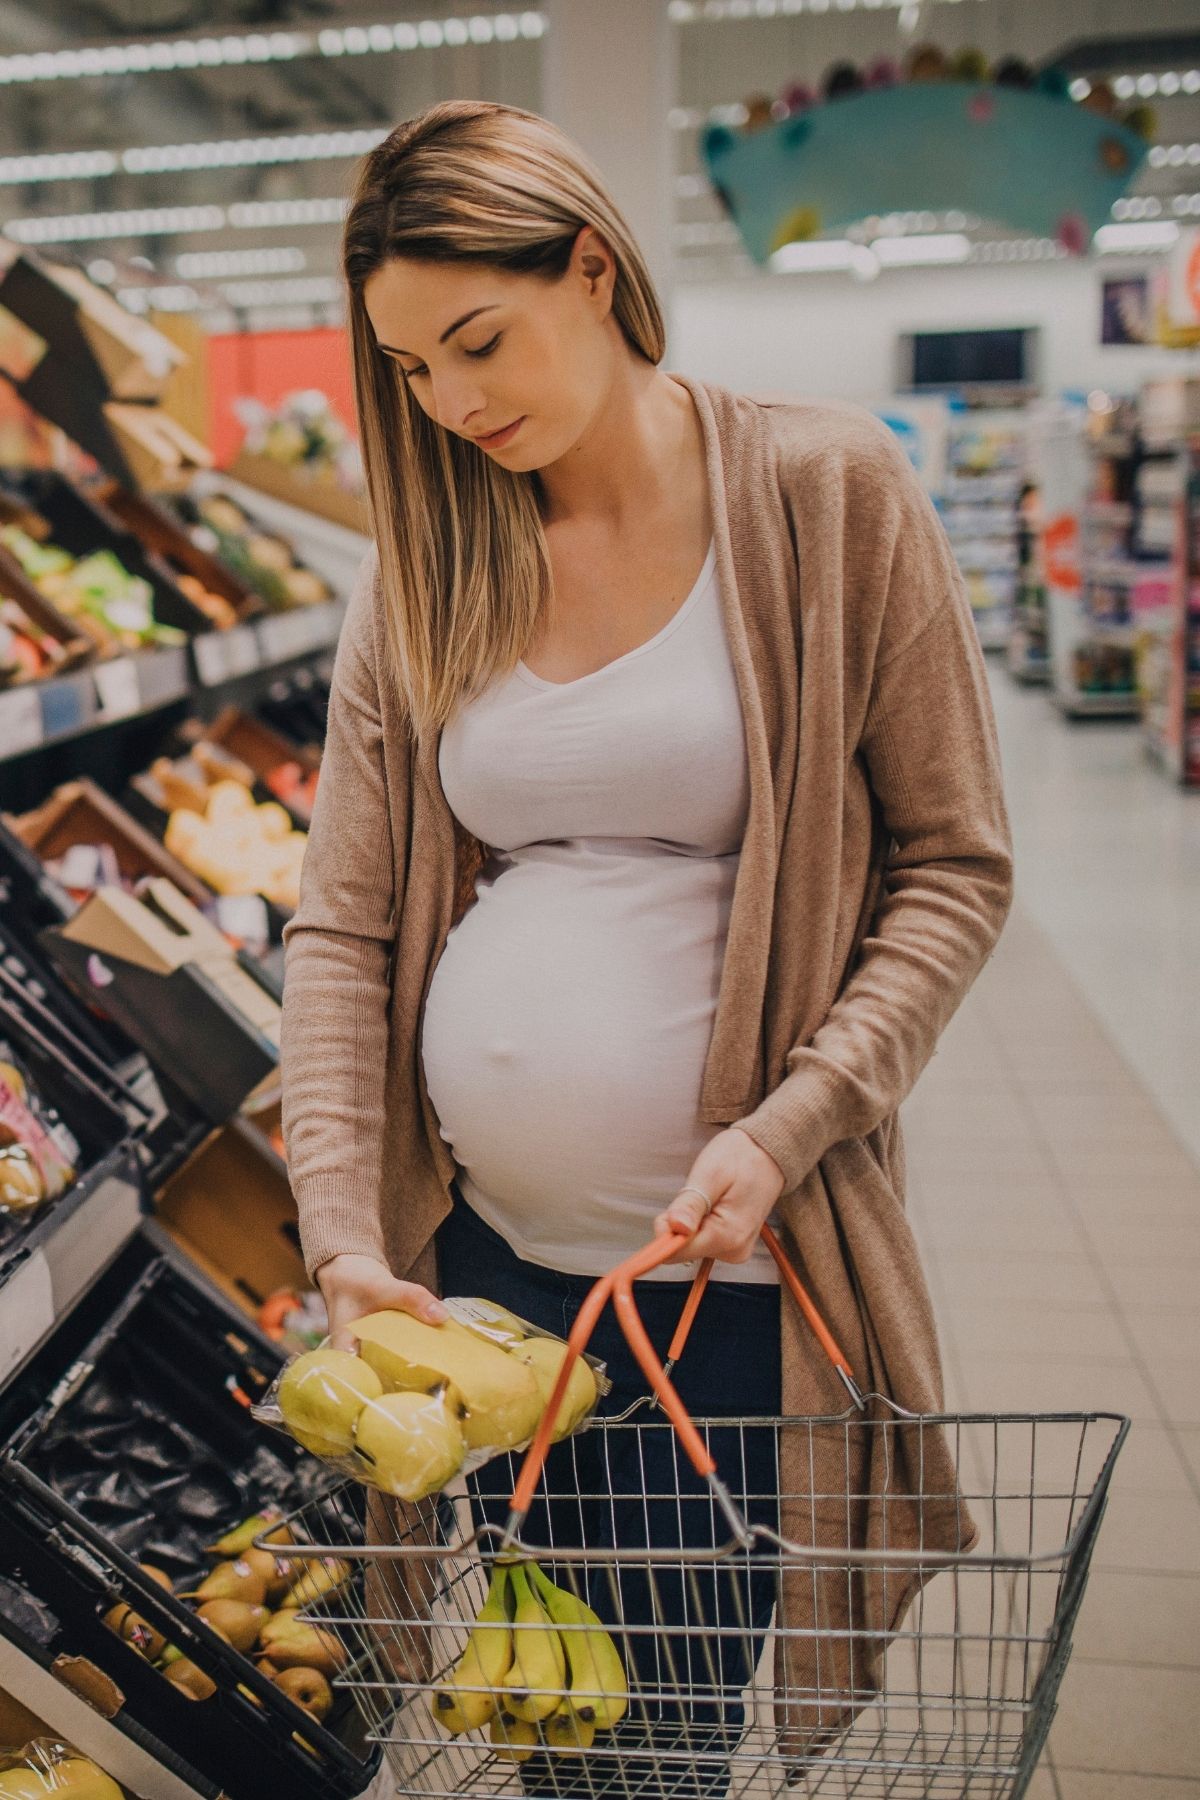 Pregnant woman in grocery store holds bag of apples over her shopping basket carrying bananas.